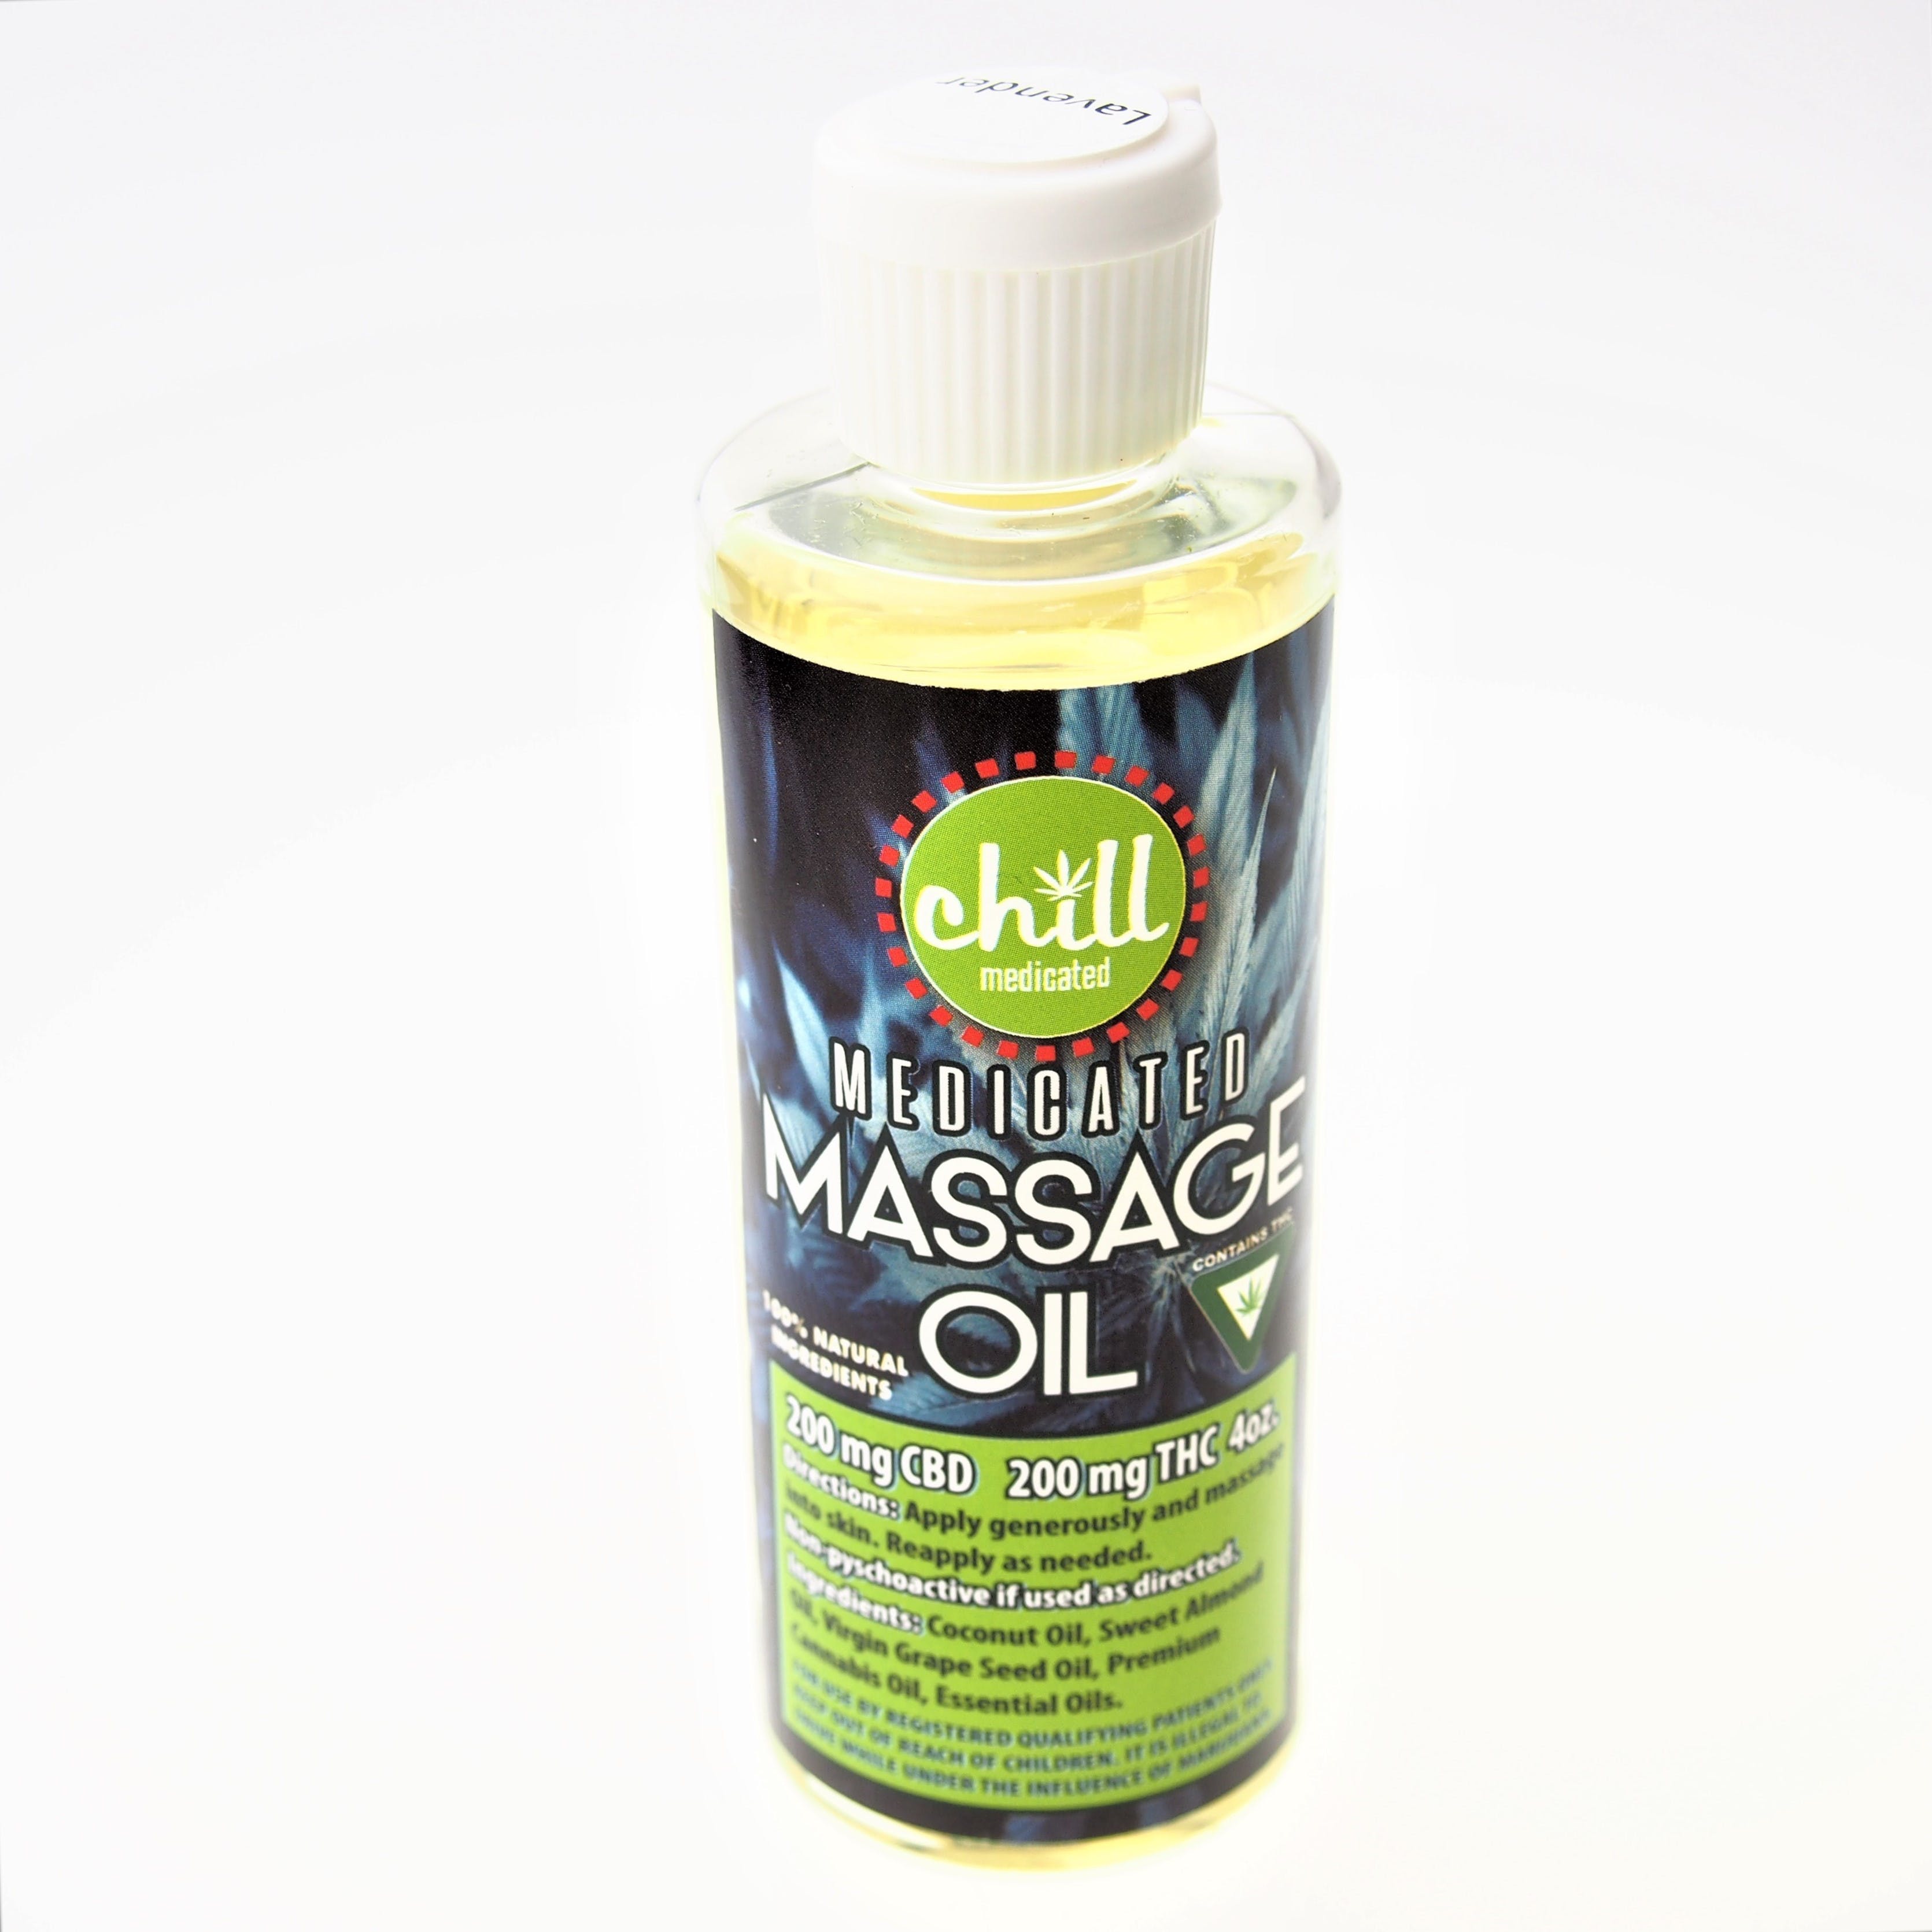 400mg Massage Oil - Chill Medicated